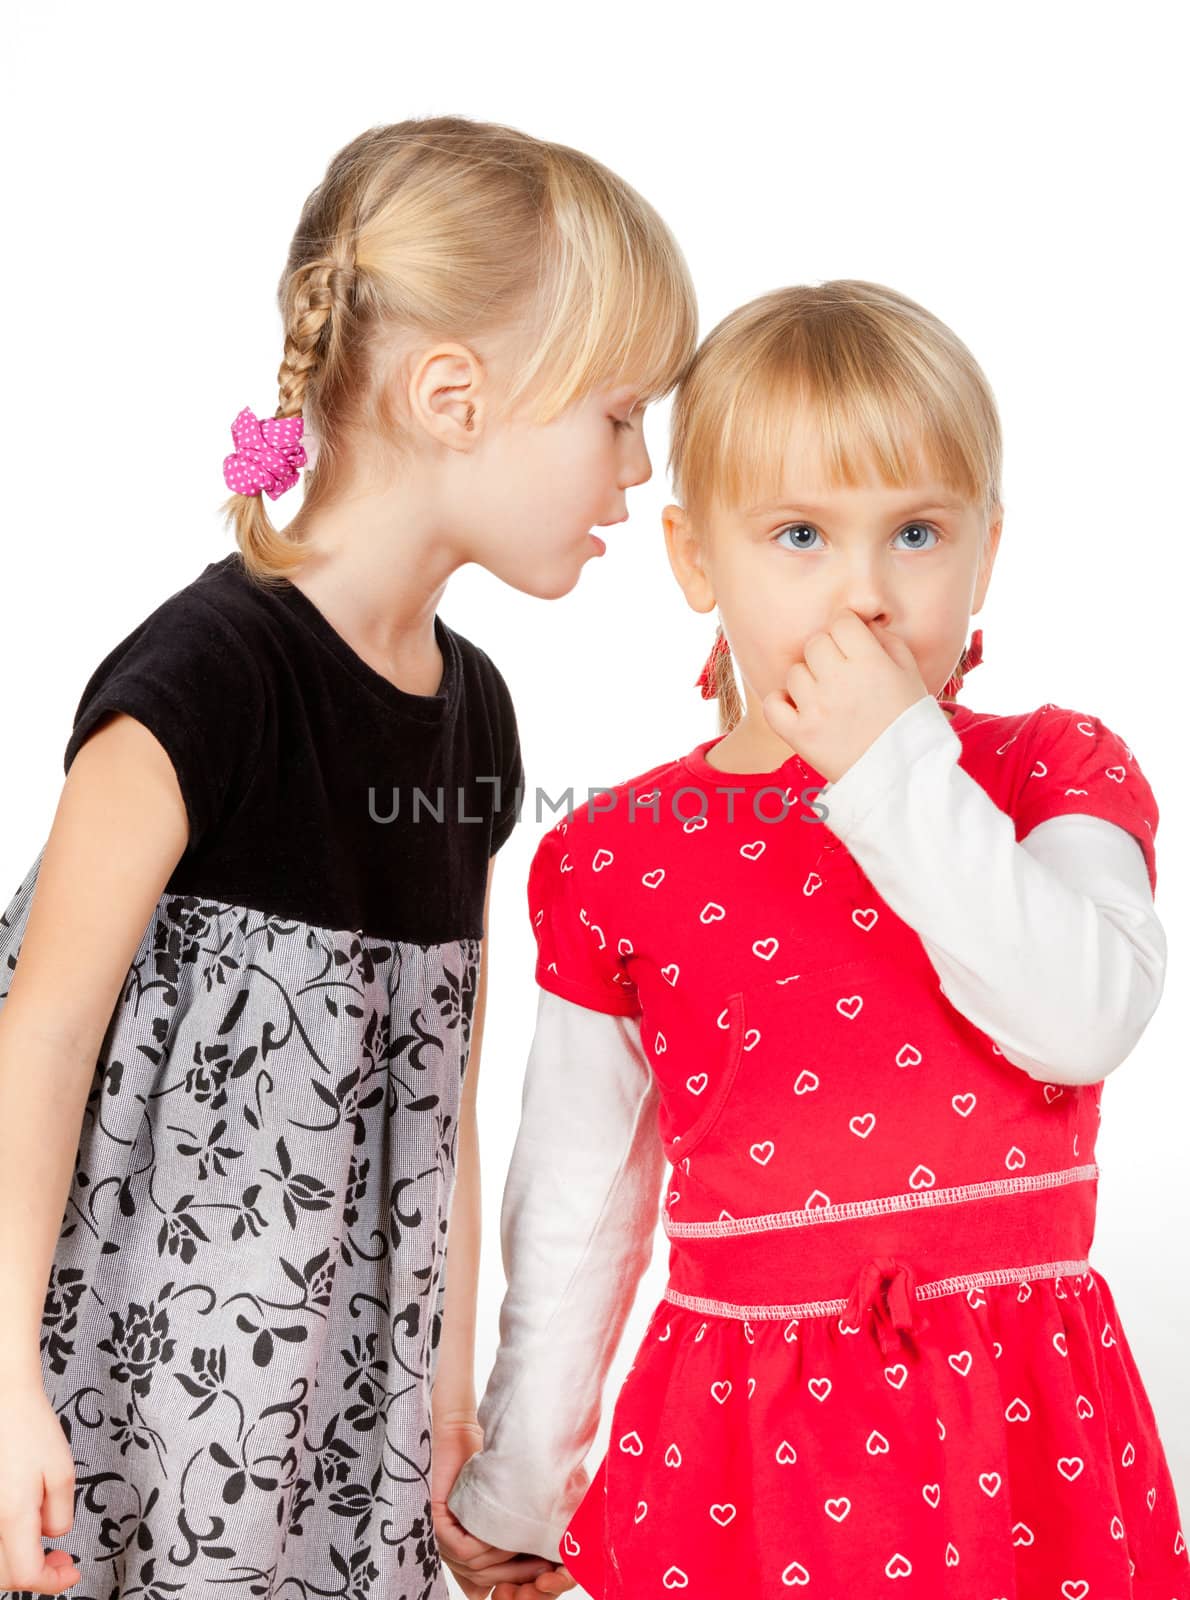 Portrait of little girl wearing black telling a secret to her friend over a white background